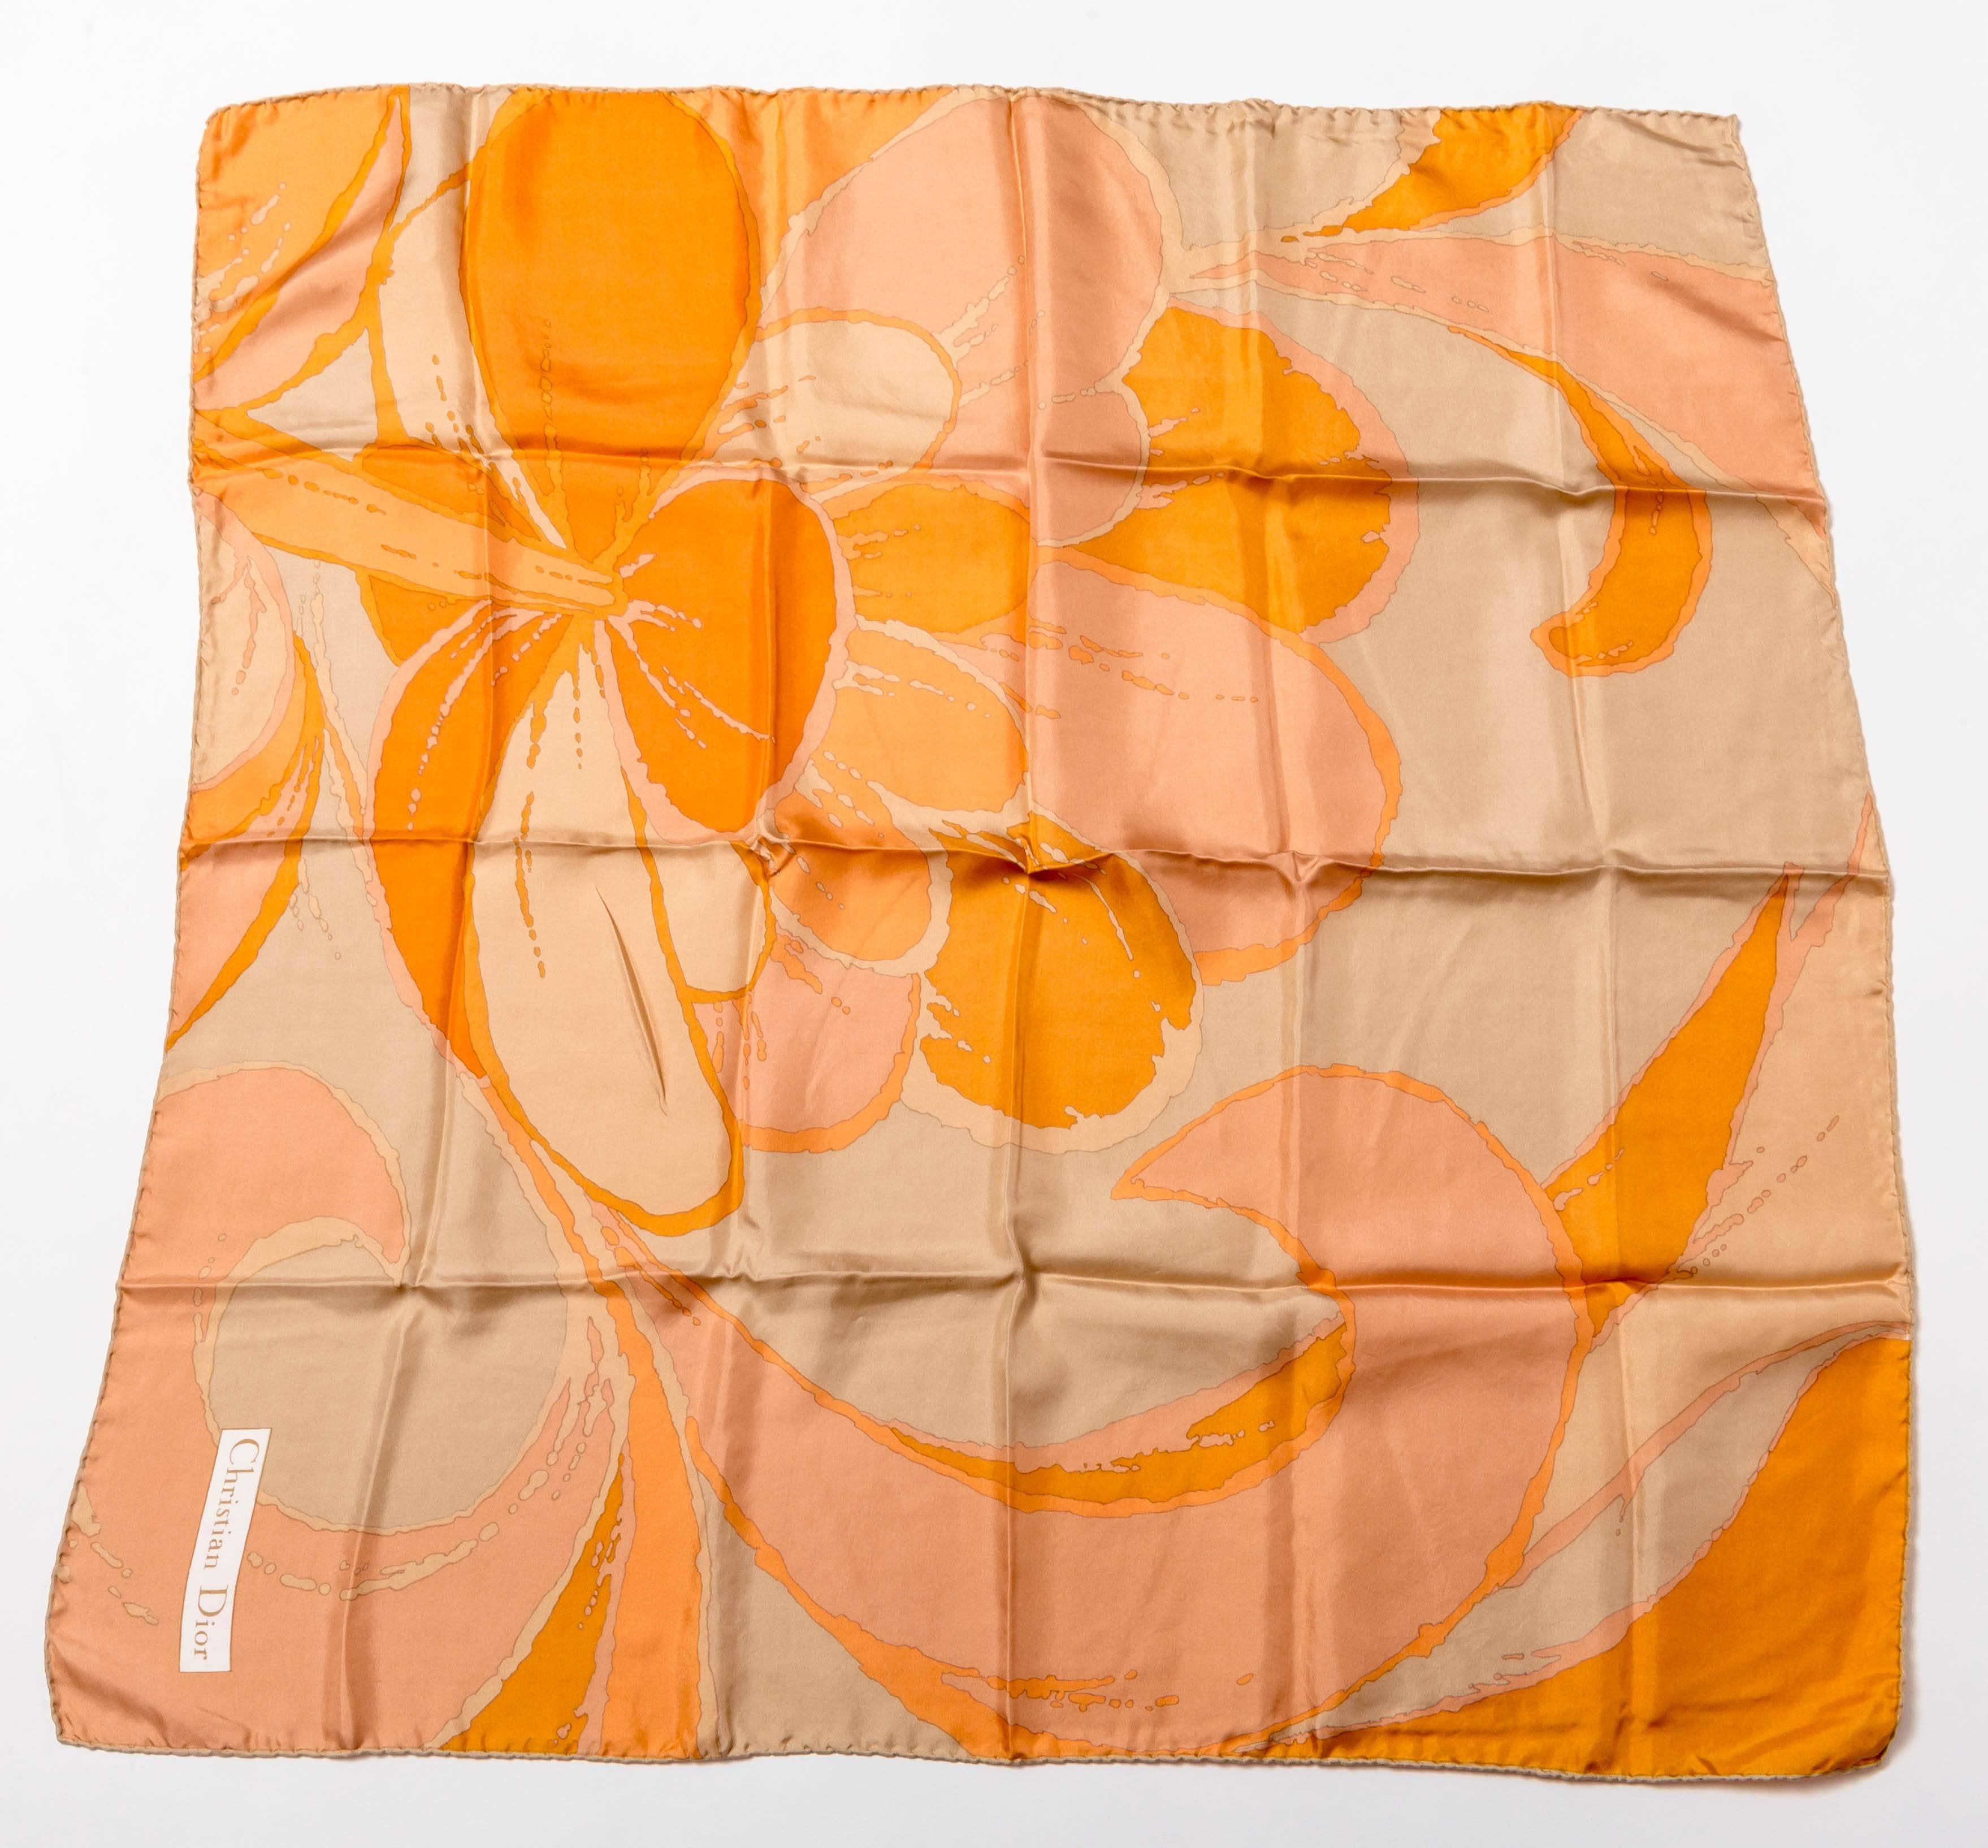 Very pretty Christian Dior scarf in shades of orange. This is a vintage scarf and has a hand rolled edge featuring a floral theme.
